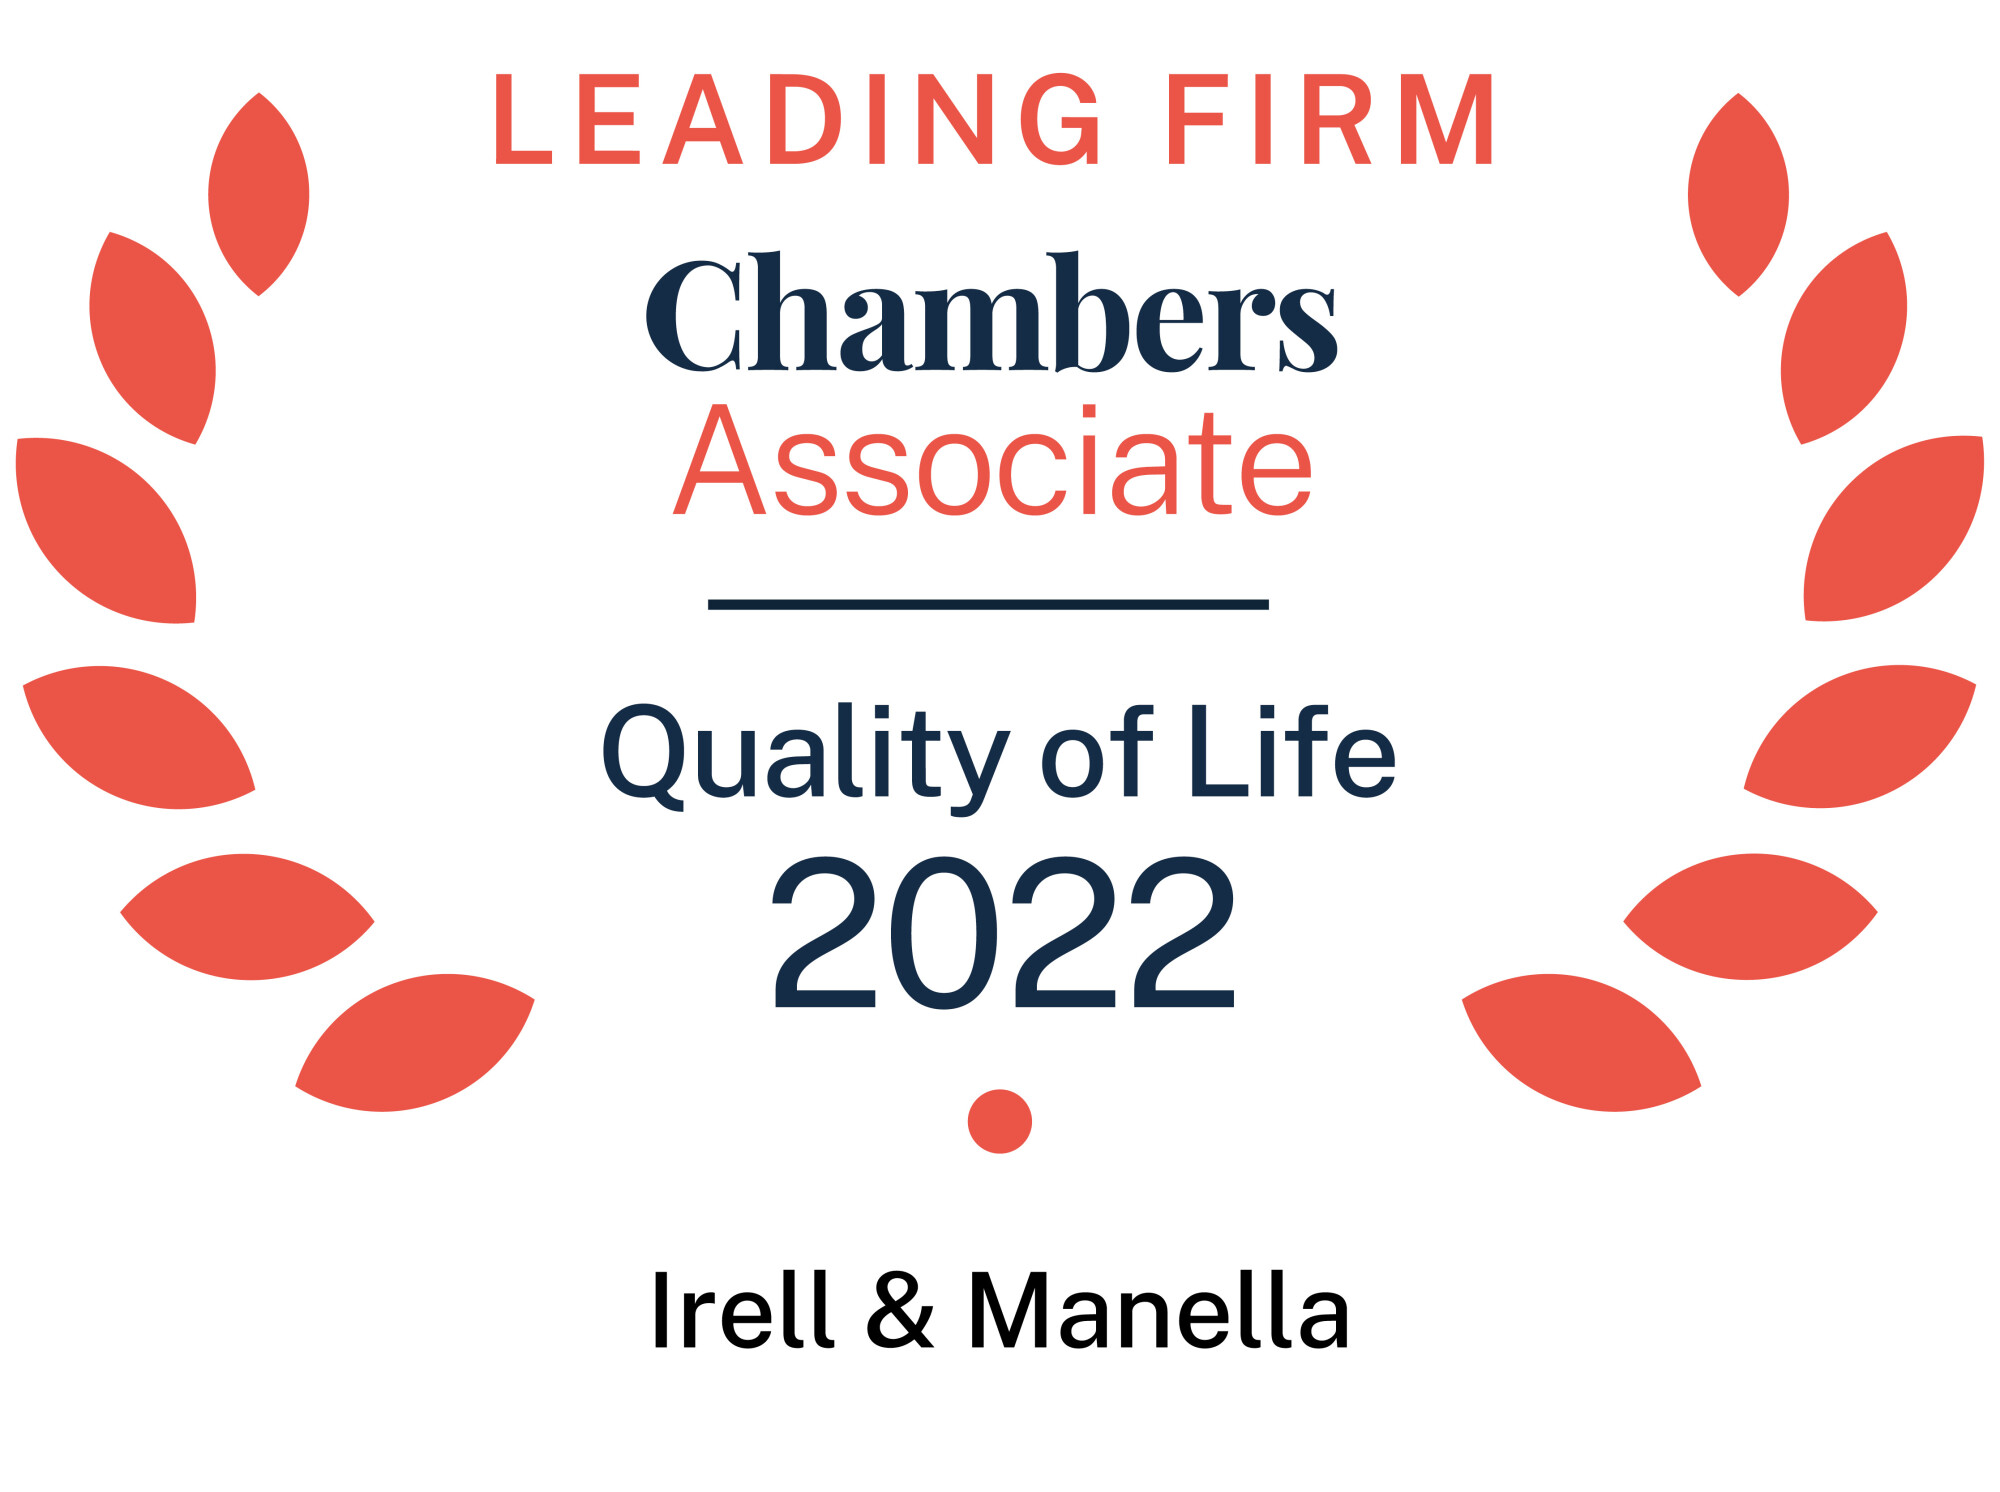 Chambers Associate Leading Firm in Quality of Life